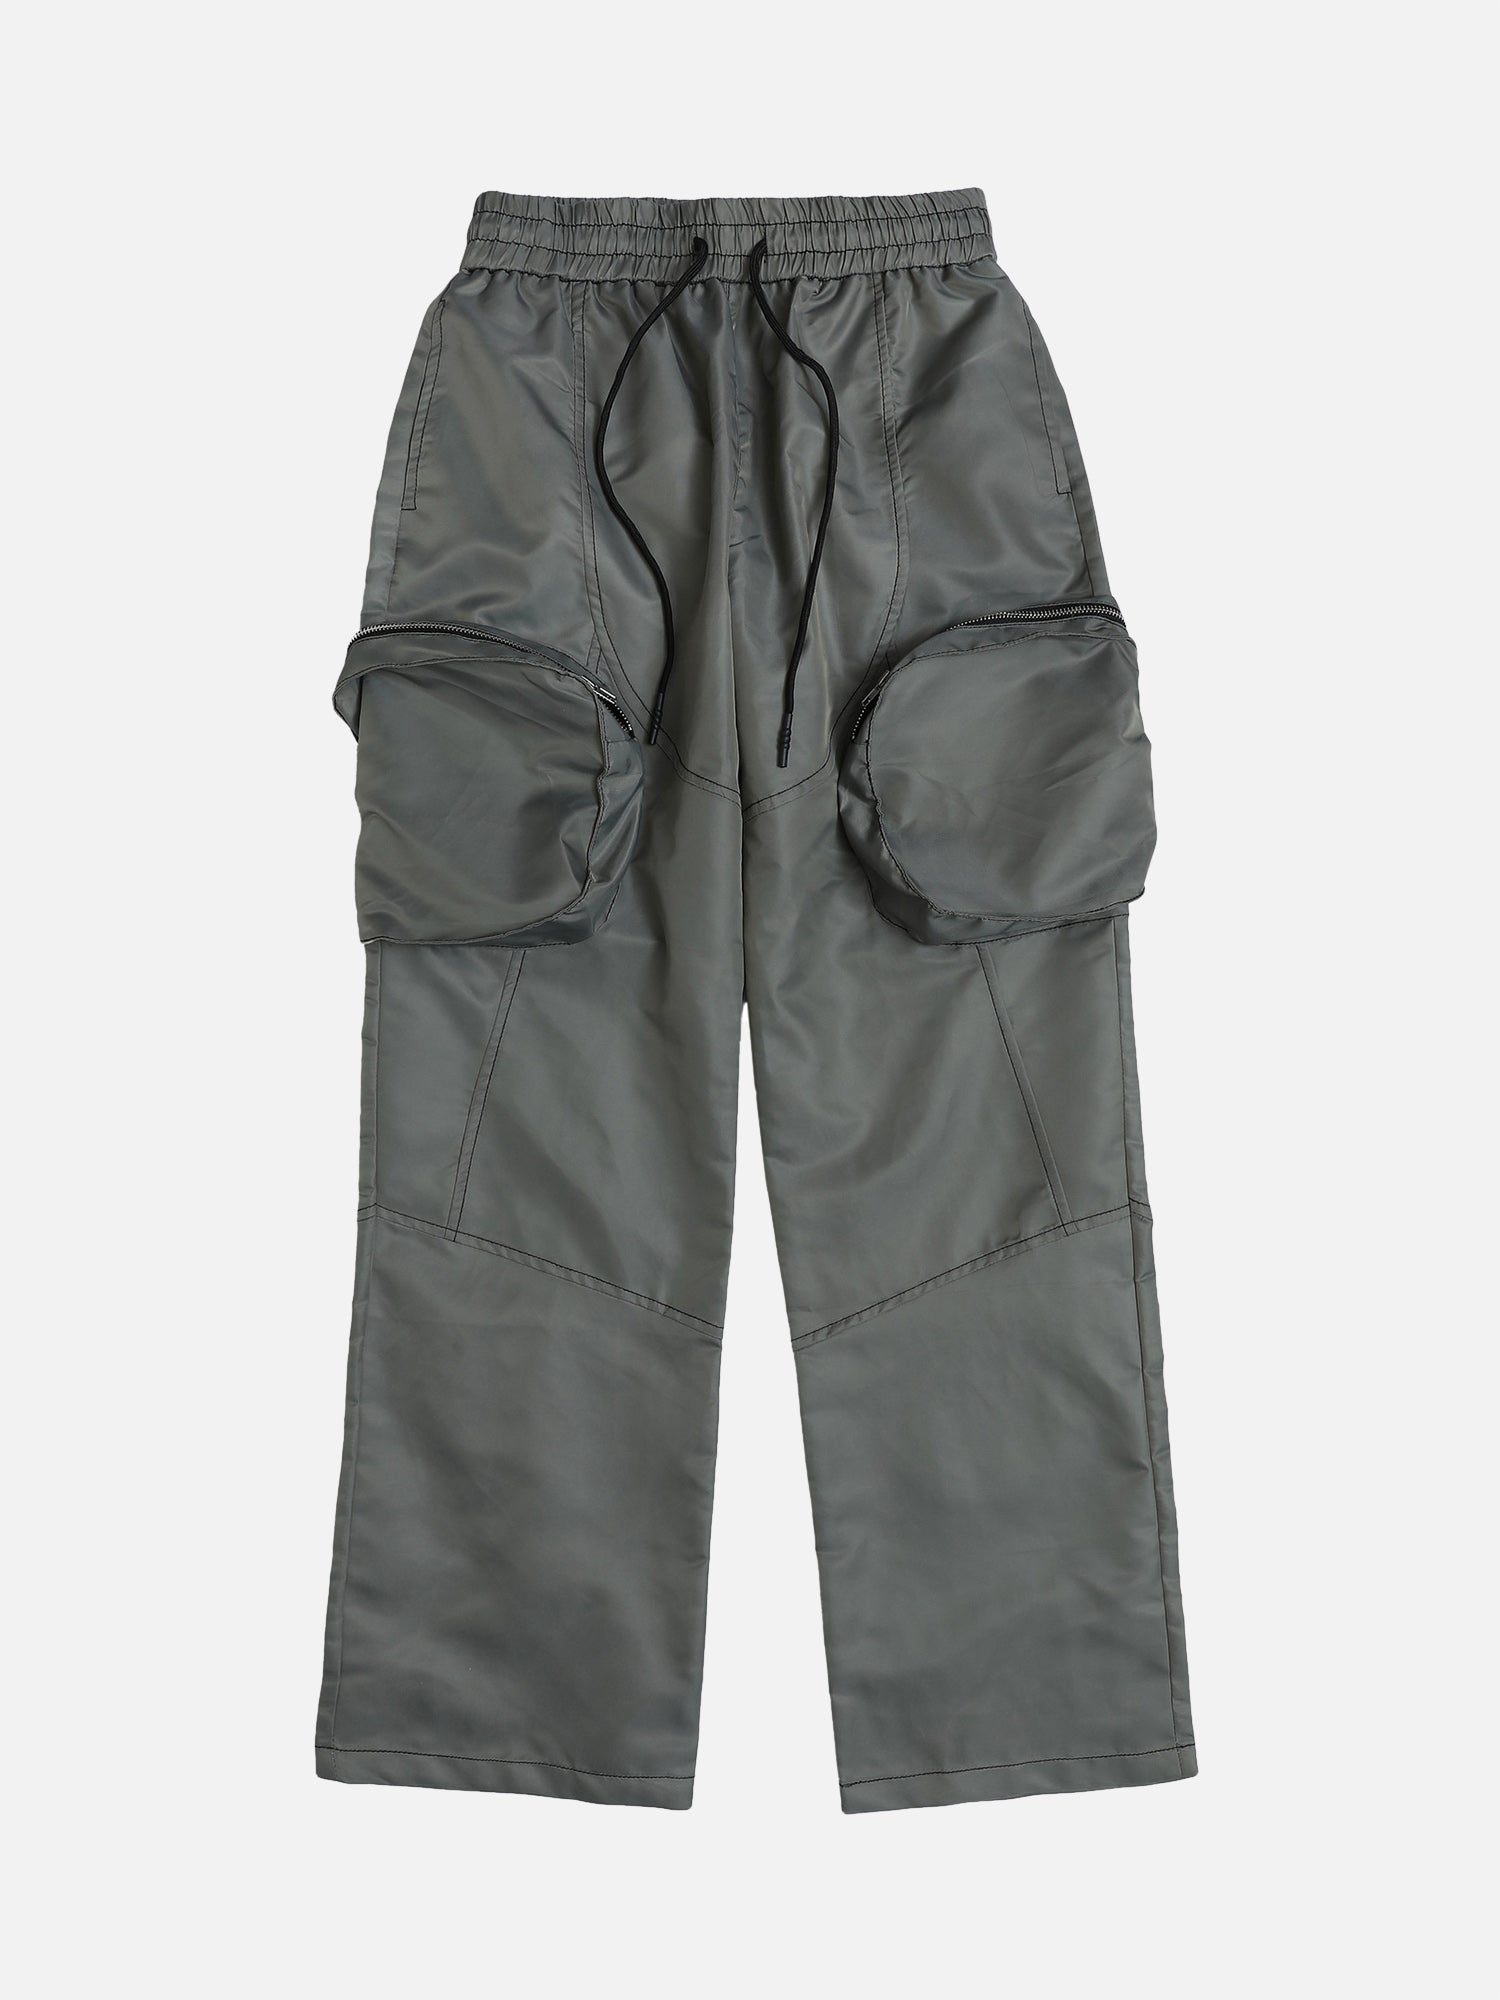 Street Fashion Brand Special-shaped Pocket Cargo Casual Sweatpants